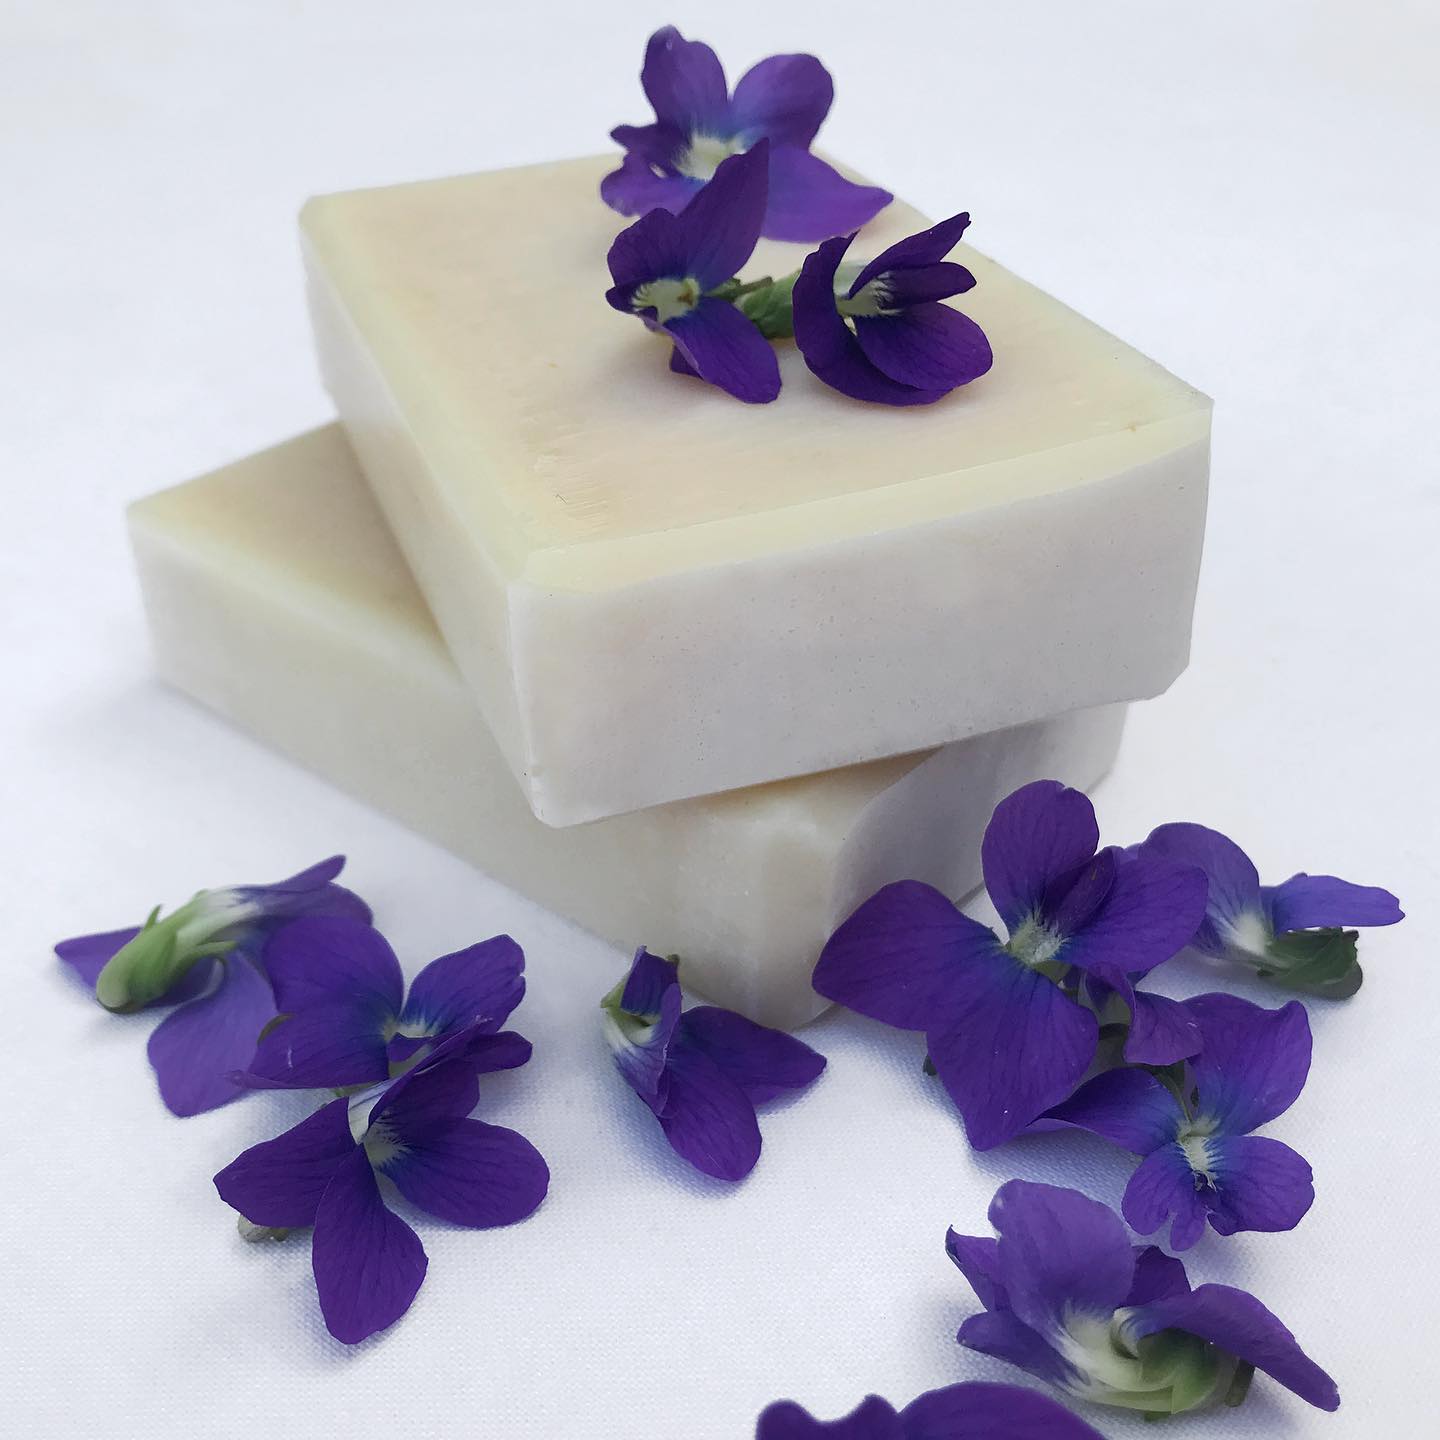 Lavender Mint Goat Milk Soap is a popular soap in my shop, with many benefits for your skin. It's soothing to dry skin, and reduces inflammation. Goat milk soap is naturally high in lactic acid, which also helps relieve and diminish acne. Each bar is infused with lavender that was grown right in my Brookland backyard. Besides smelling great, lavender helps lower anxiety, and brings additional healing properties.

Come get a bar this Saturday at the Brookland Farmers Market 9-1PM, 716 Monroe Street NE, near the Brookland metro stop!

#dcevents #popups #dcpopup #weekendplans #weekend #dcthingstodo #dmvevents #brooklanddc #brookland #dcfarmersmarket #shopsmall #bythingsdc #mydccool #districtlylocal #destinationdc #popville #yelpdc #acreatvedc #exploredc #dclife #washingtondc #walkwithlocals #mydcist #thisismadeindc #202creates #imadeyoursoap #everydaymadewell #artswalkdc #madeindc #dcmakers